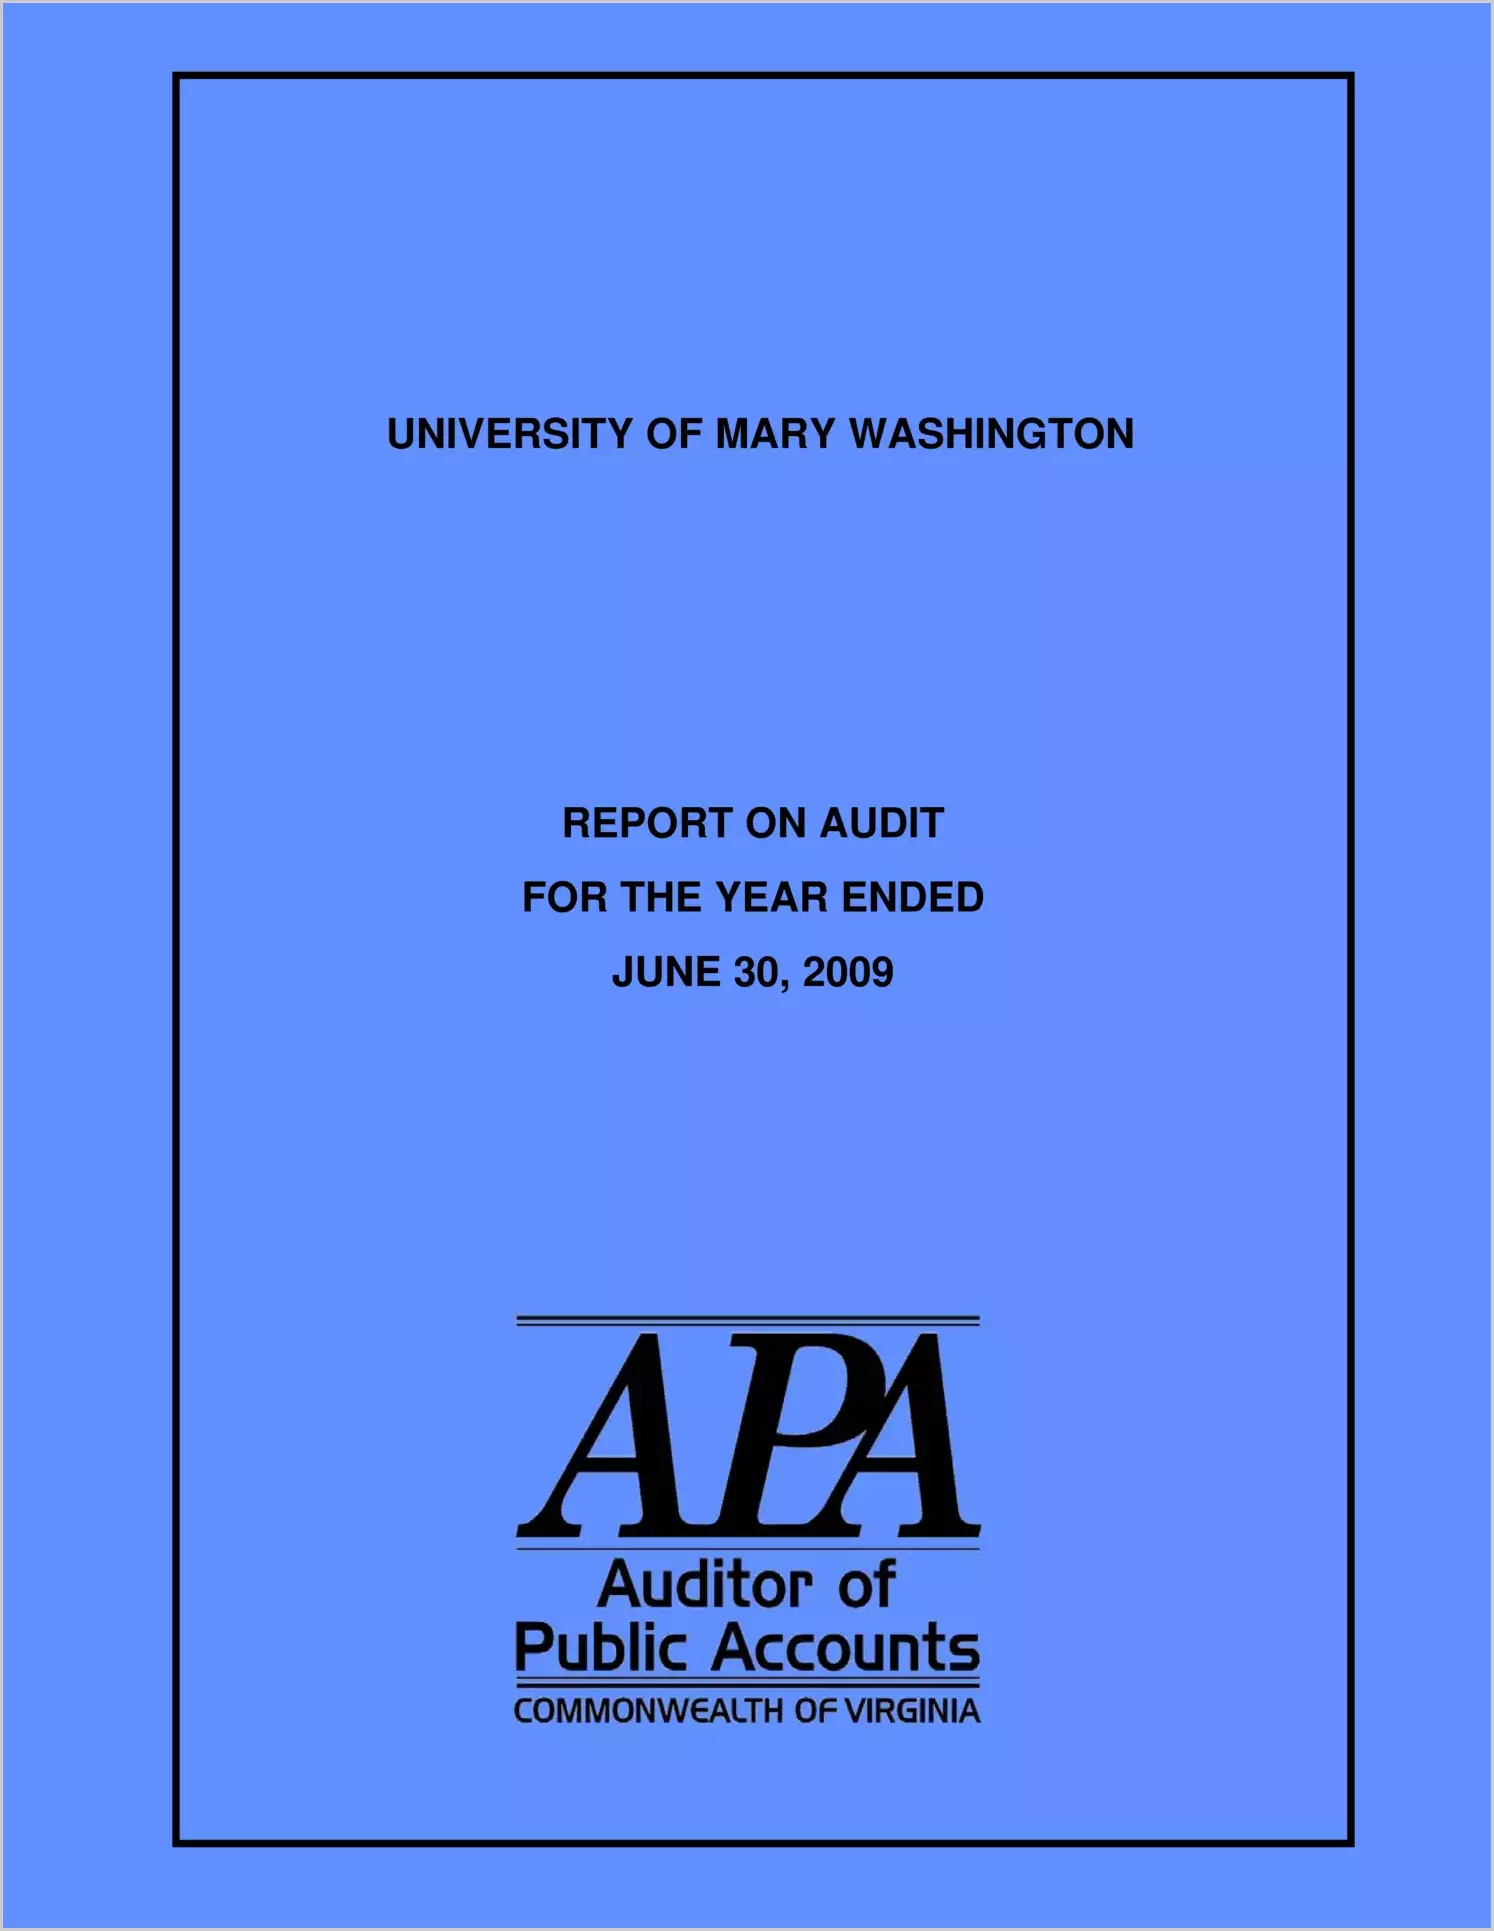 University of Mary Washington for the year ended June 30, 2009